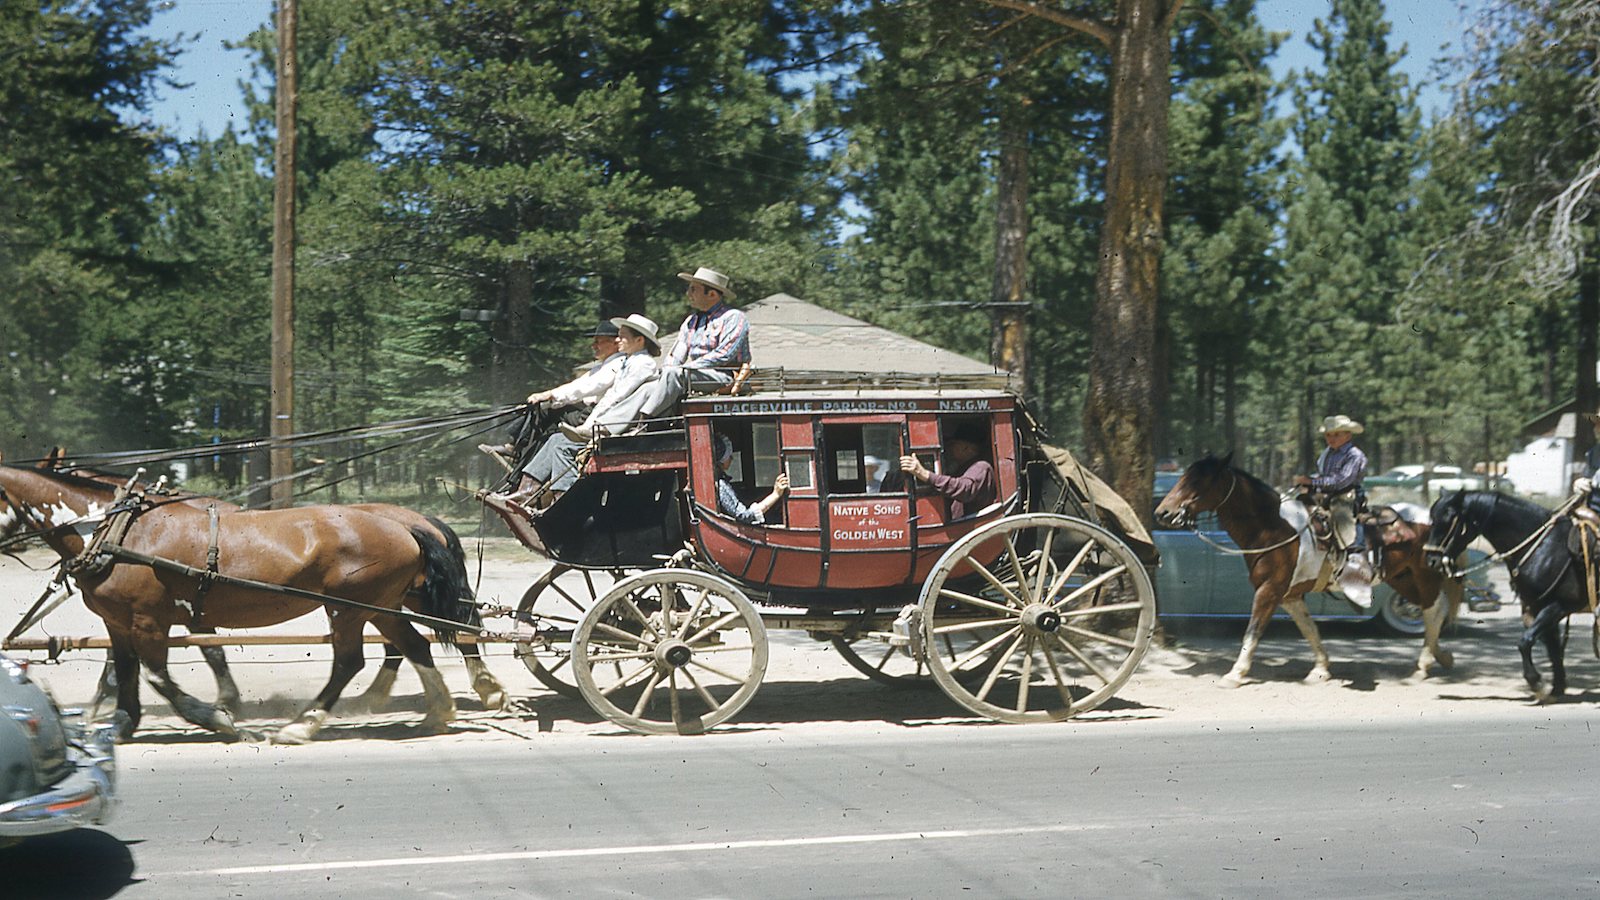 Horse drawn carriages at Western Days Tahoe